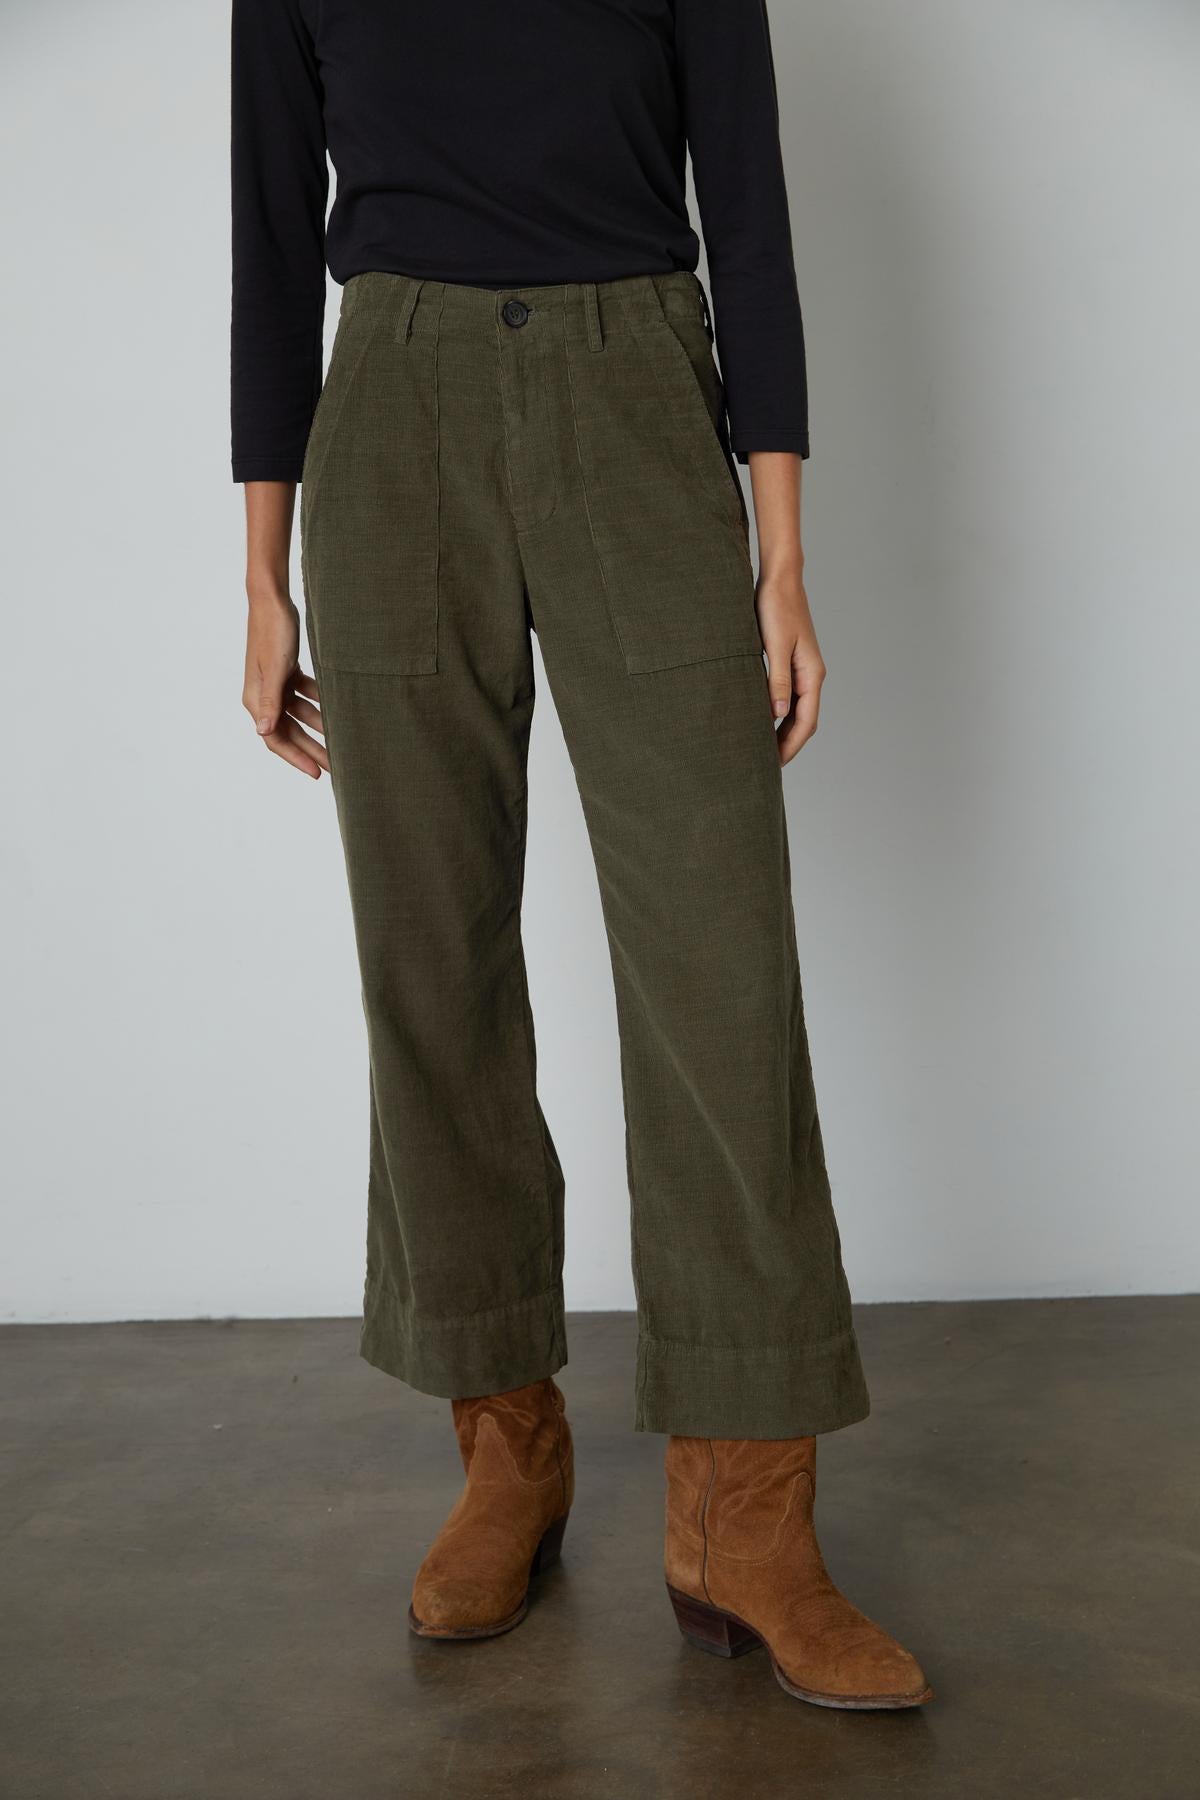 A woman wearing VERA CORDUROY WIDE LEG PANTS by Velvet by Graham & Spencer and black boots.-26727676575937